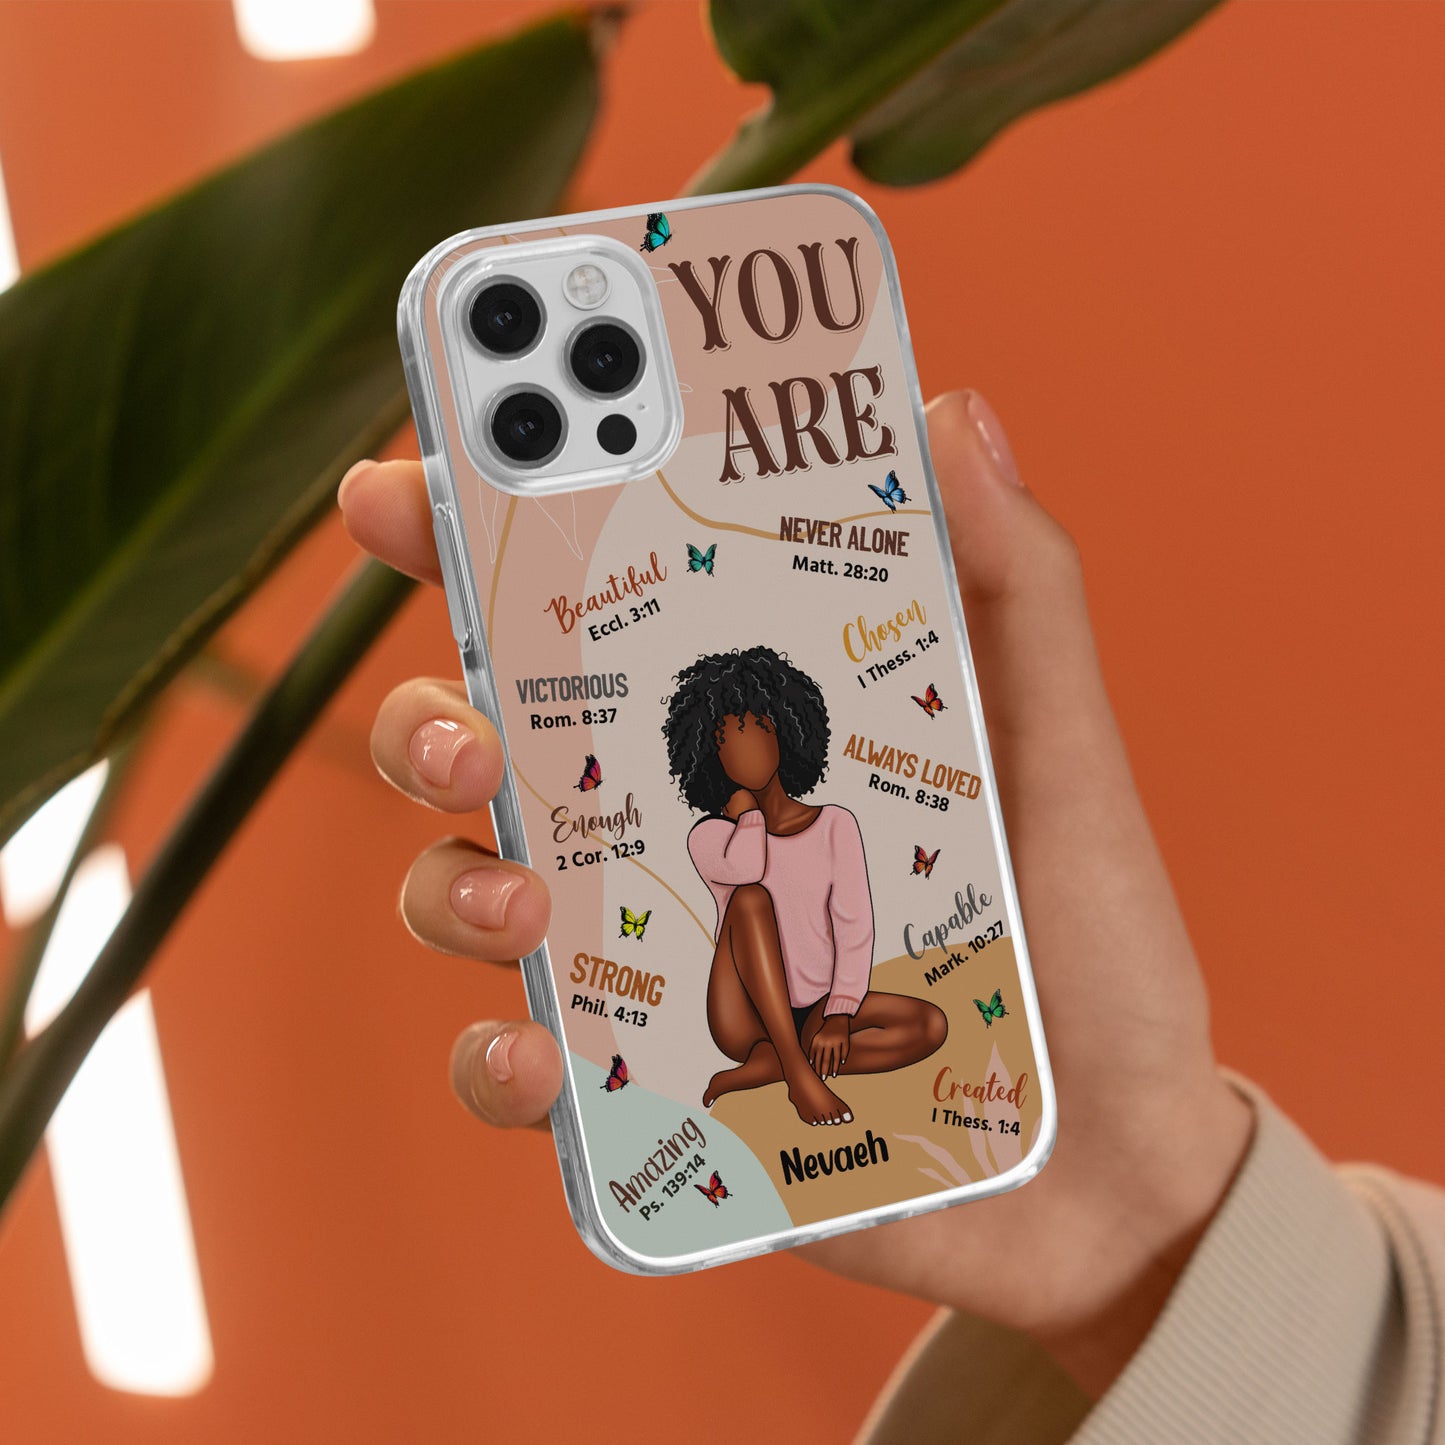 You Are Beautiful - Personalized Clear Phone Case